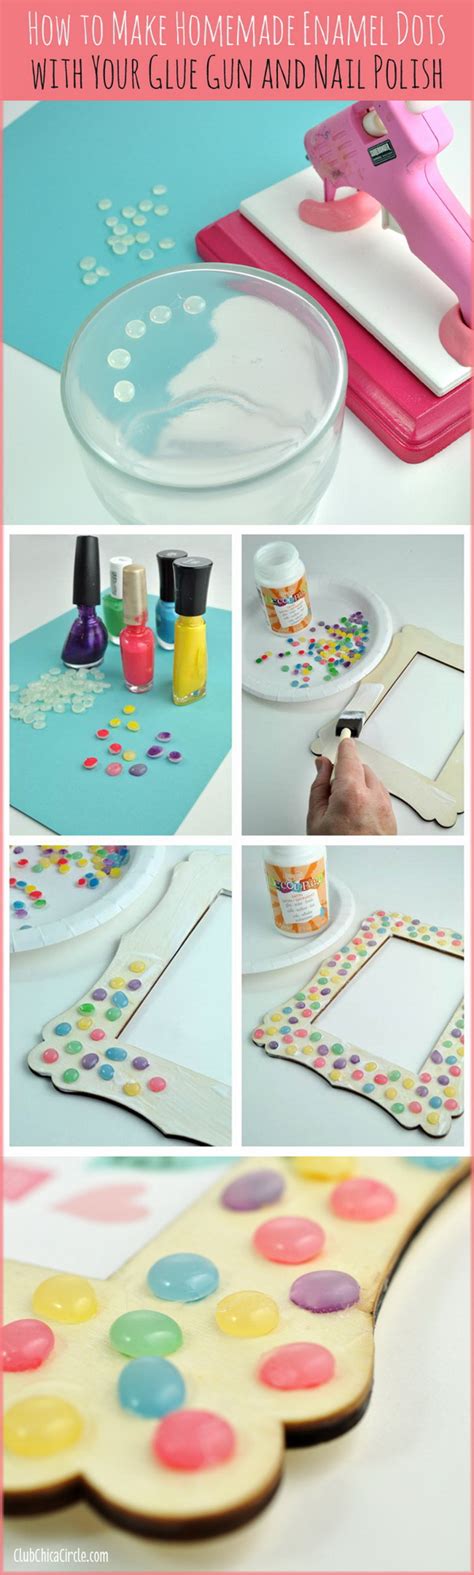 30 Cool Diy Projects For Teenage Girls For Creative Juice